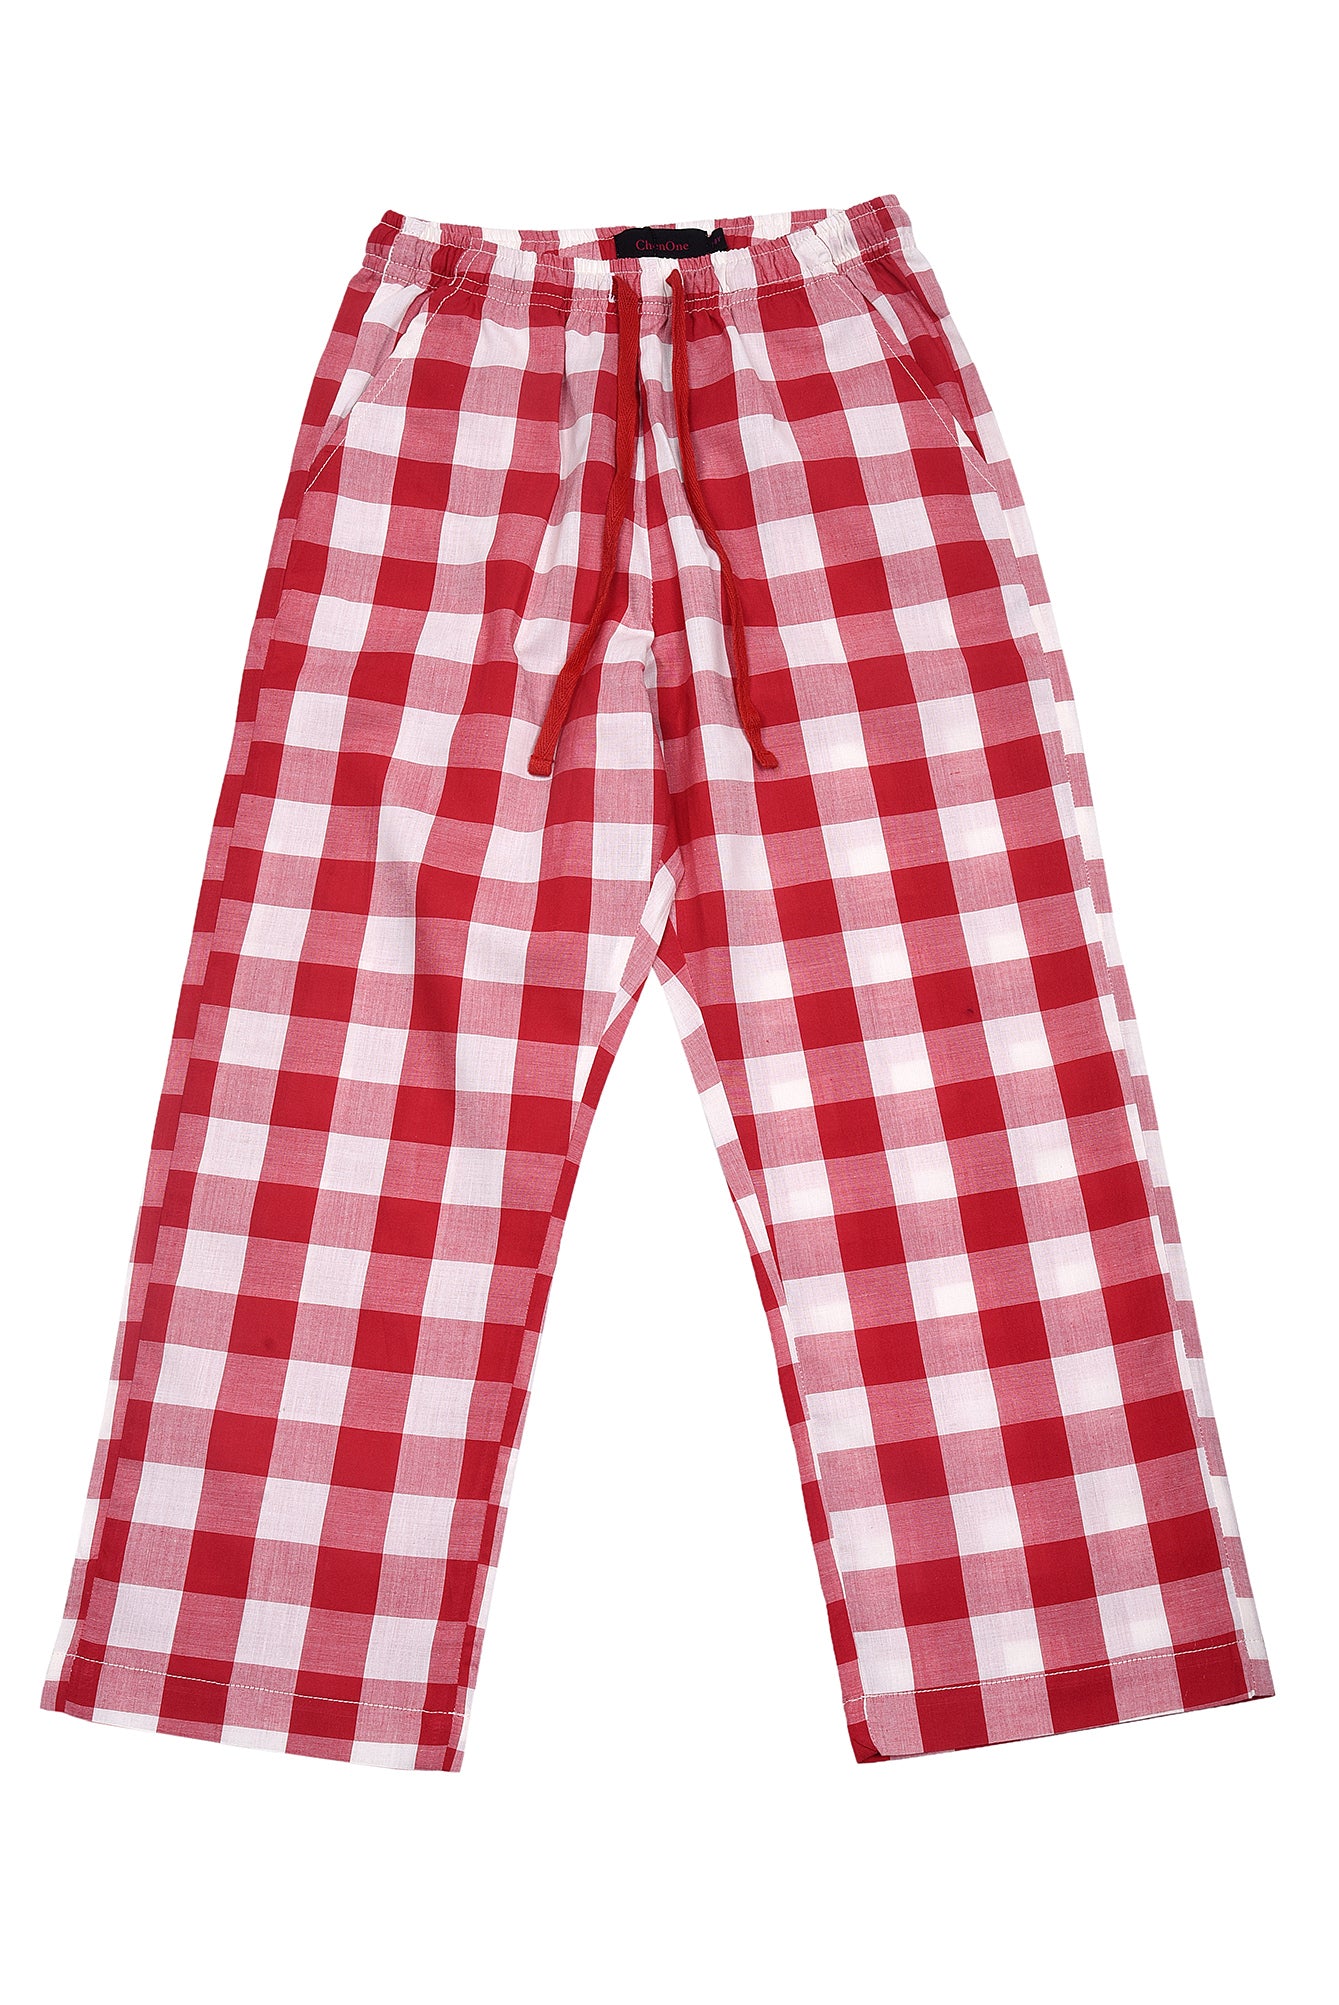 KDS-G-13160 PULL ON TROUSER RED CHECK